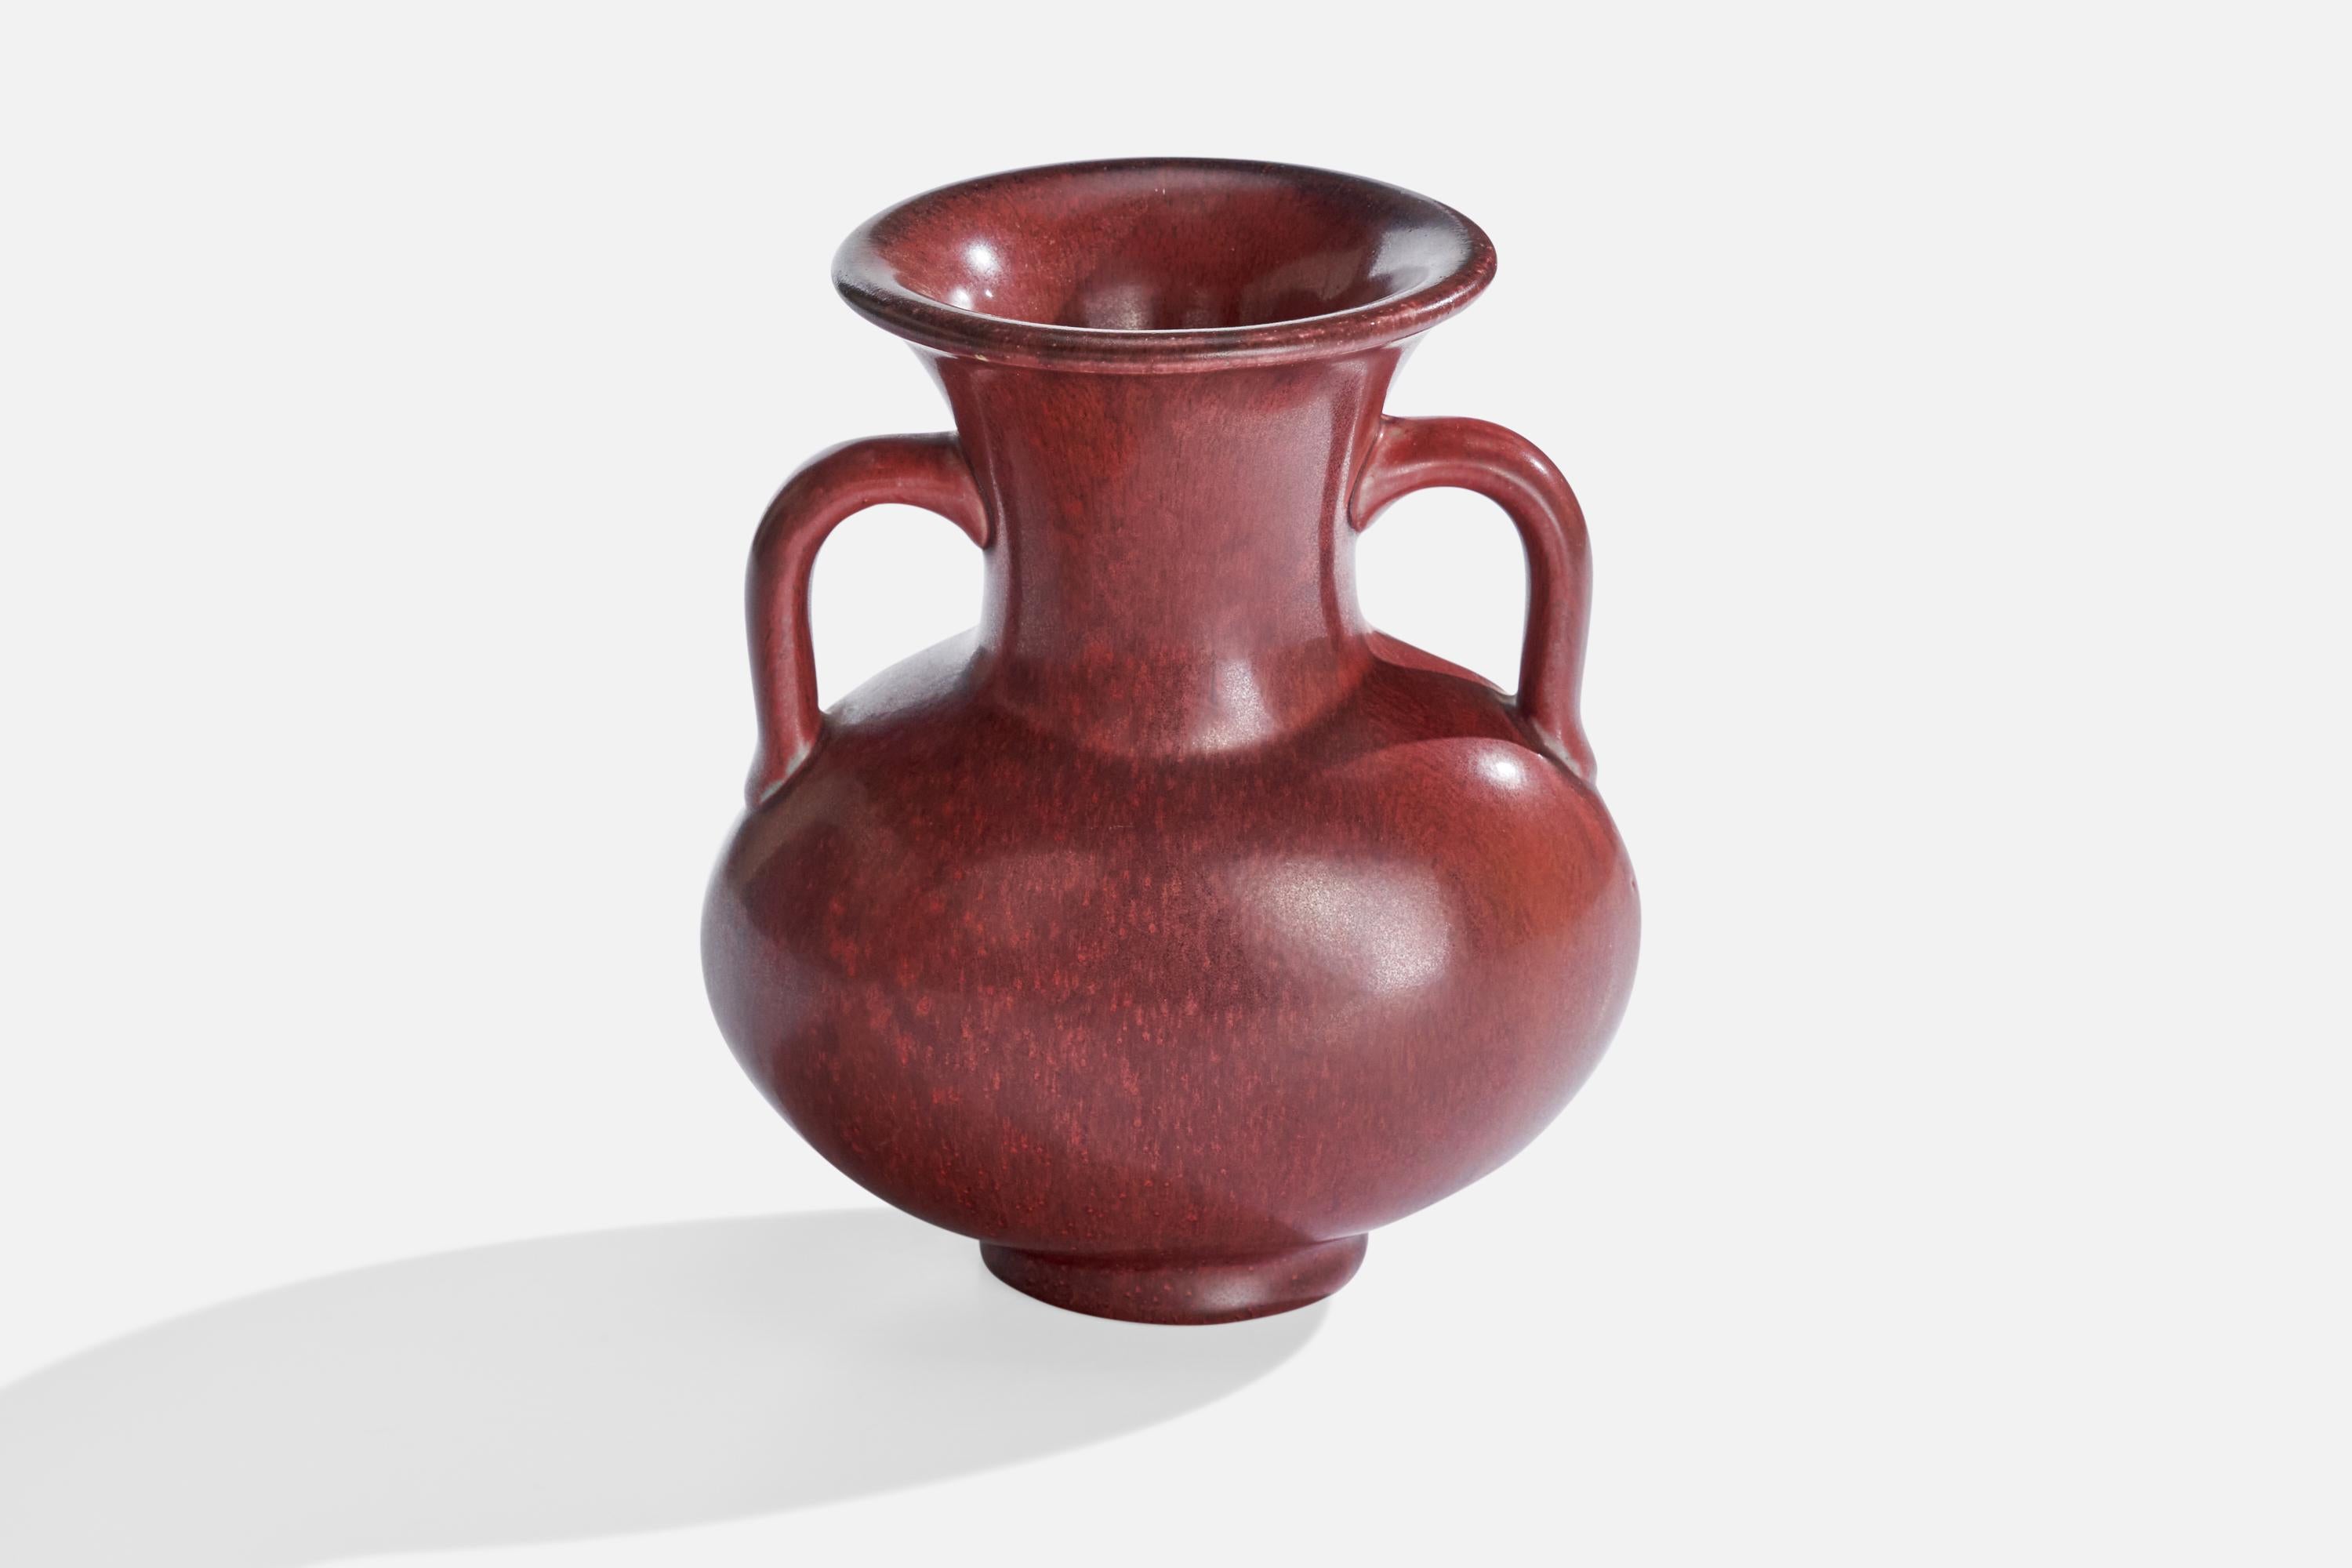 A red-glazed stoneware vase designed by Bode Willumsen and produced by Royal Copenhagen, Denmark, 1940s.